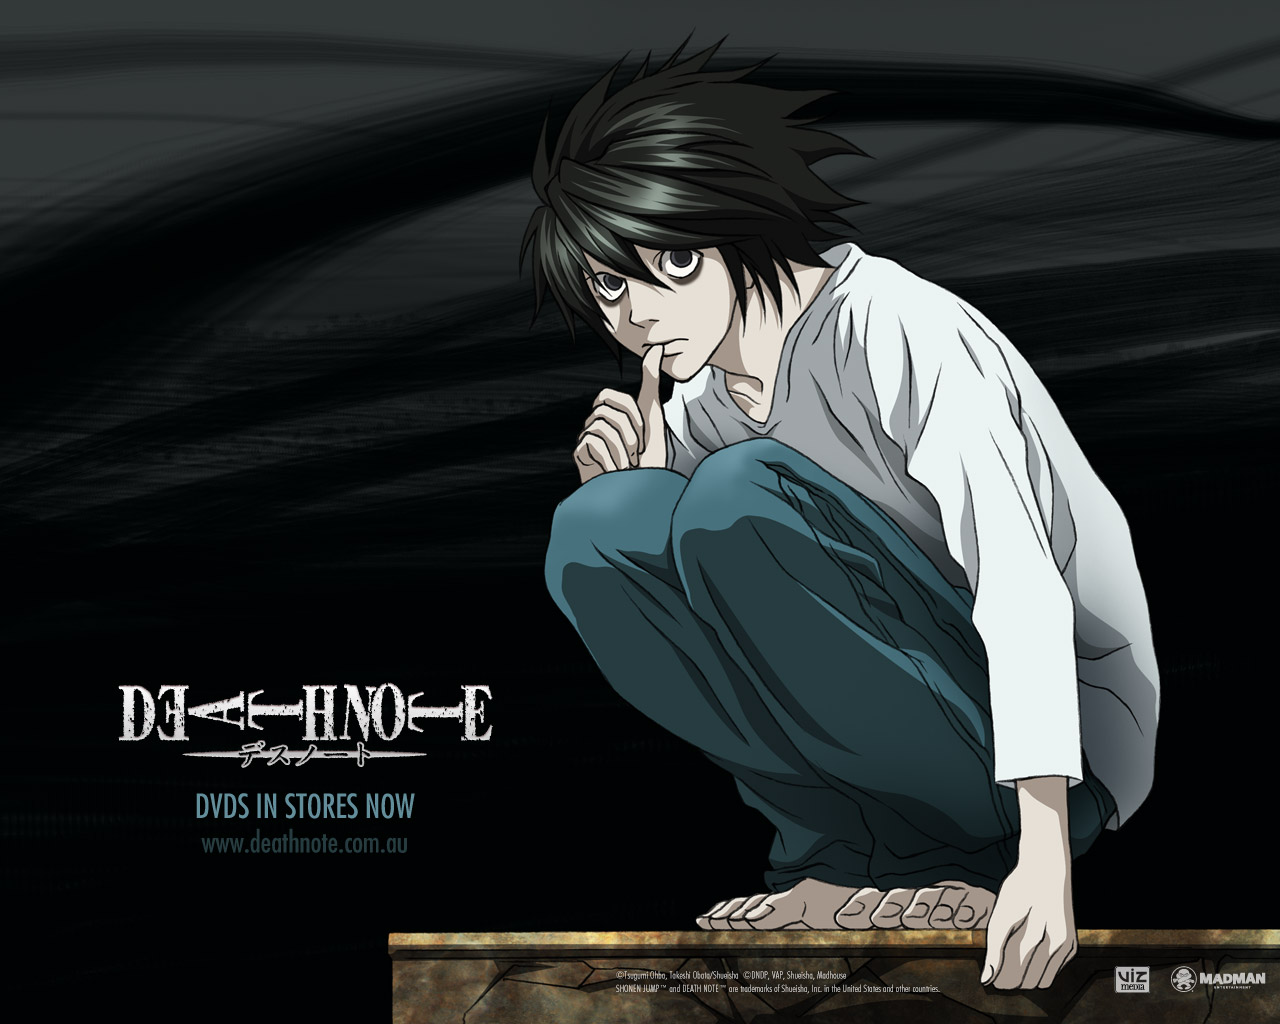 Of Death Note That Is Fill HD Wallpaper Please Add On My Ment Box